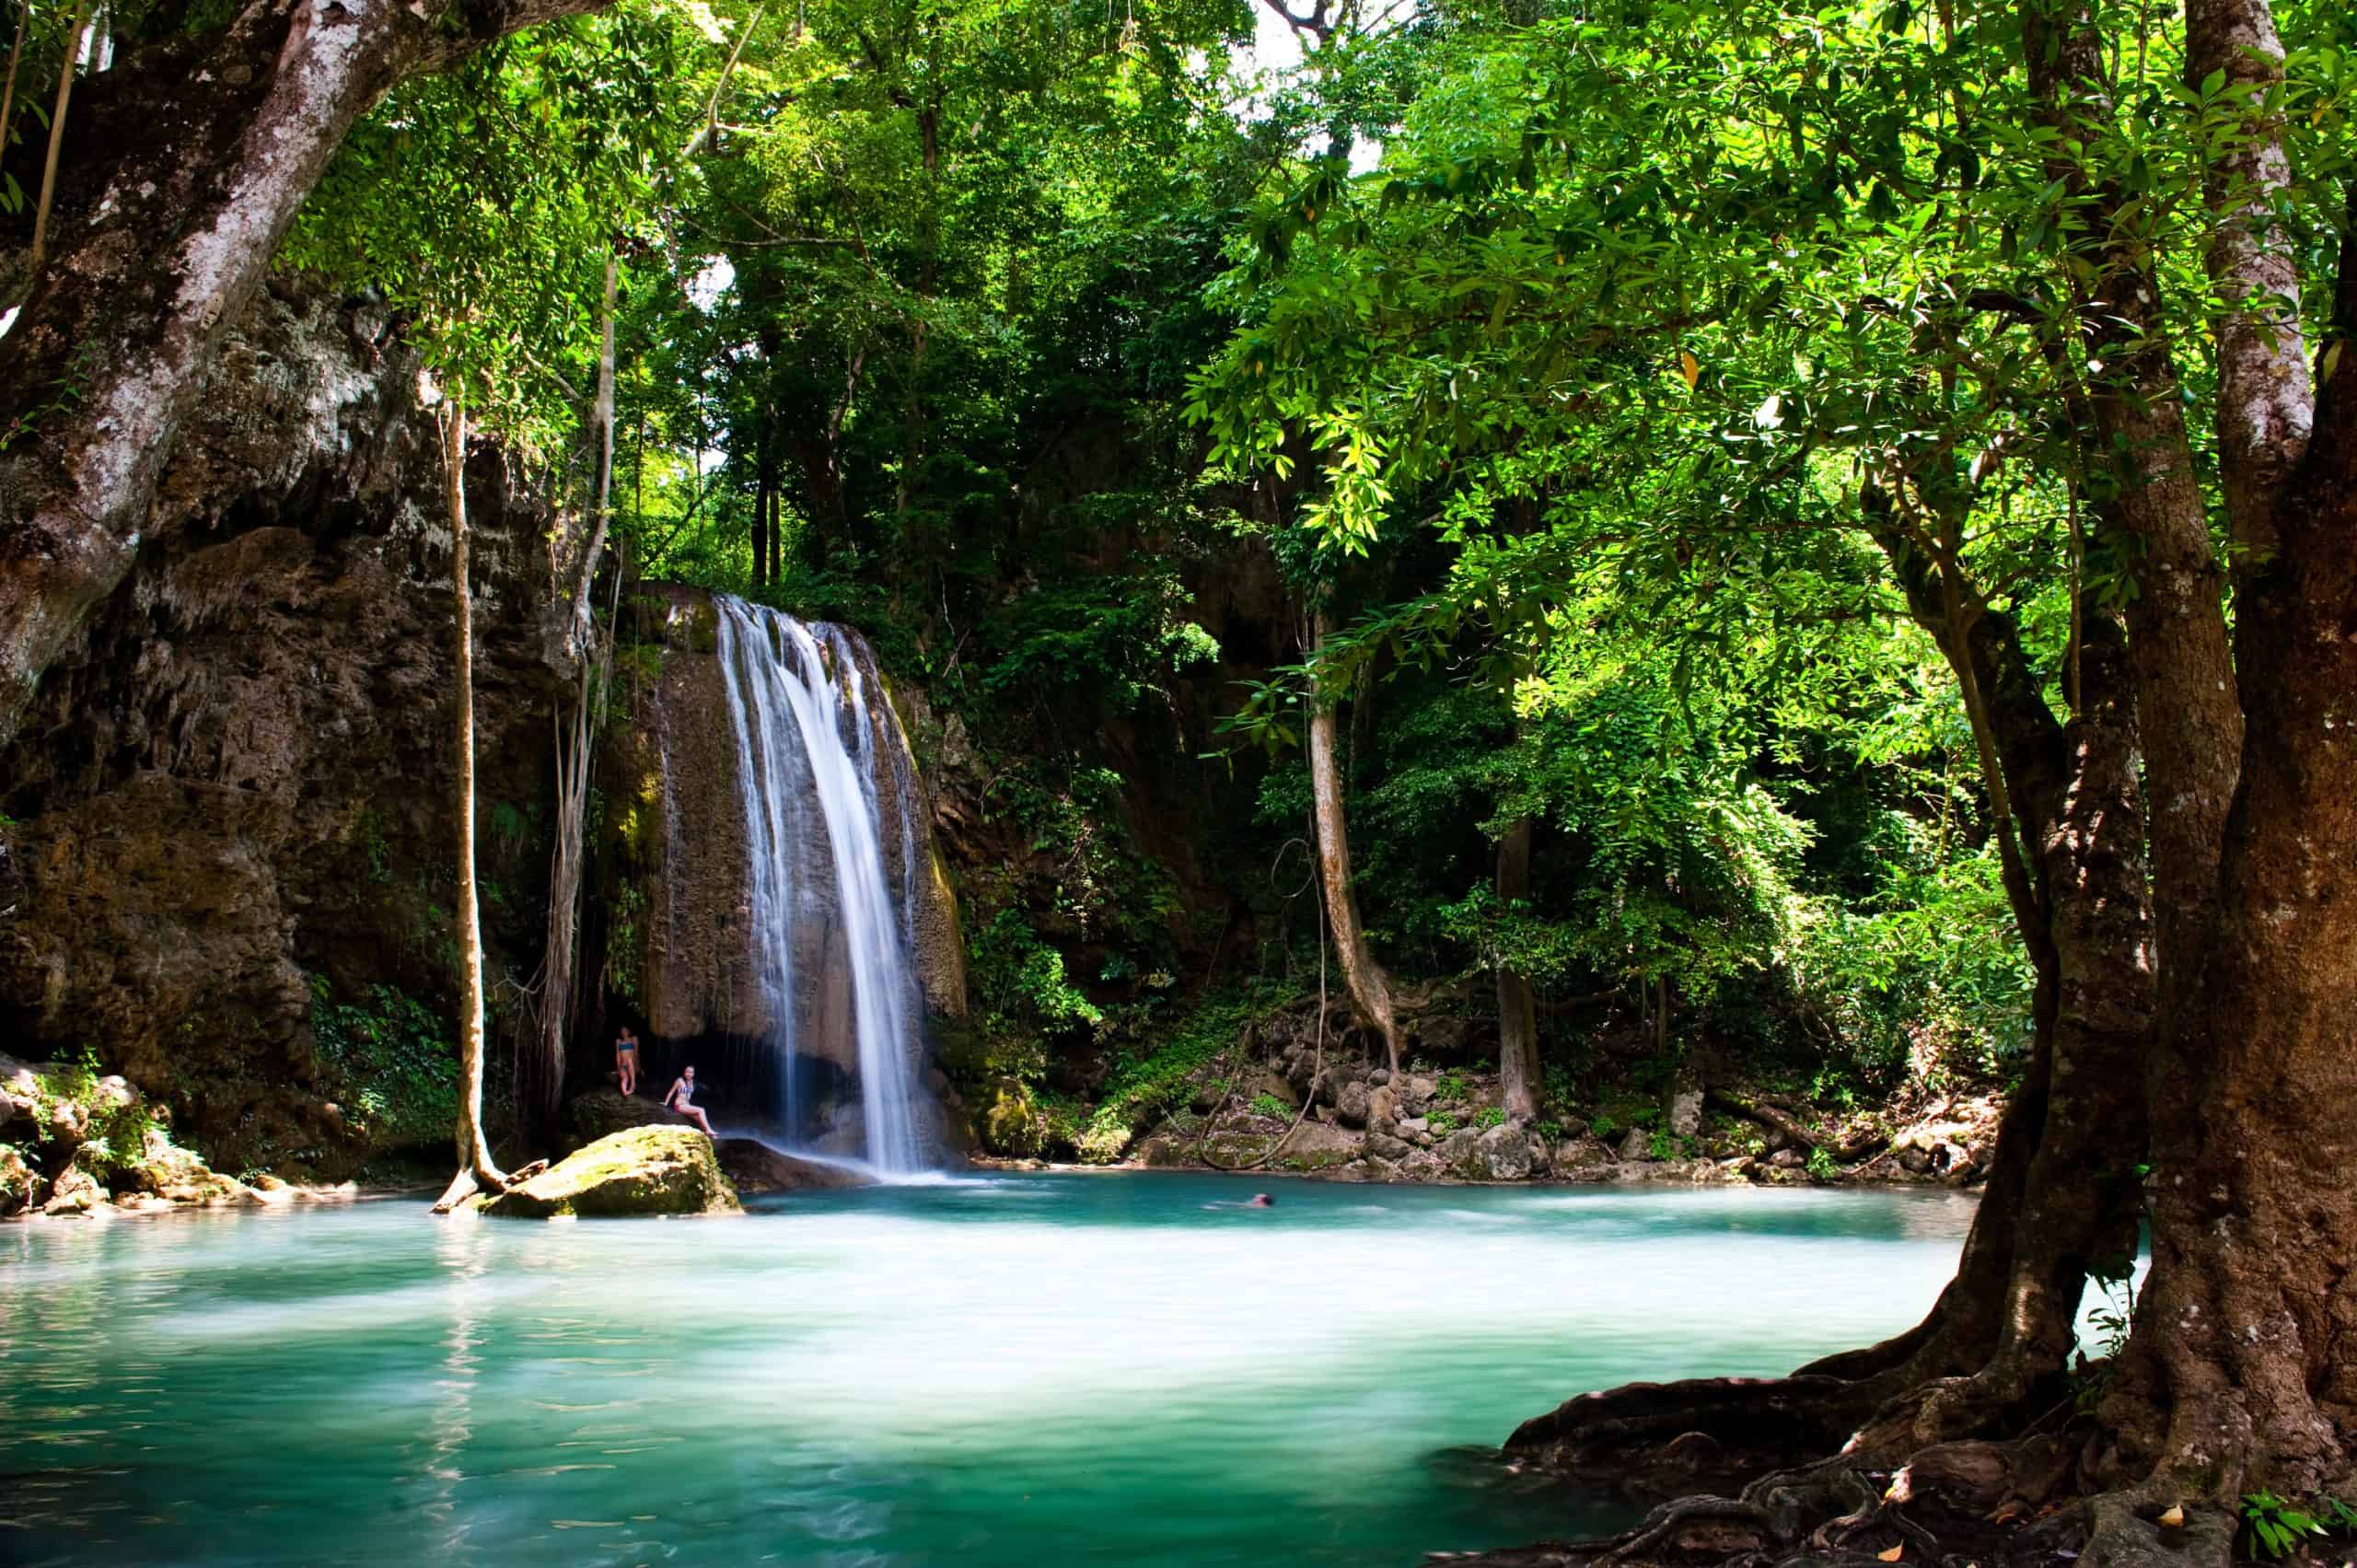 A person swims by one of many waterfalls in Kanchanaburi that flow into bright blue waters in Erawan National Park.